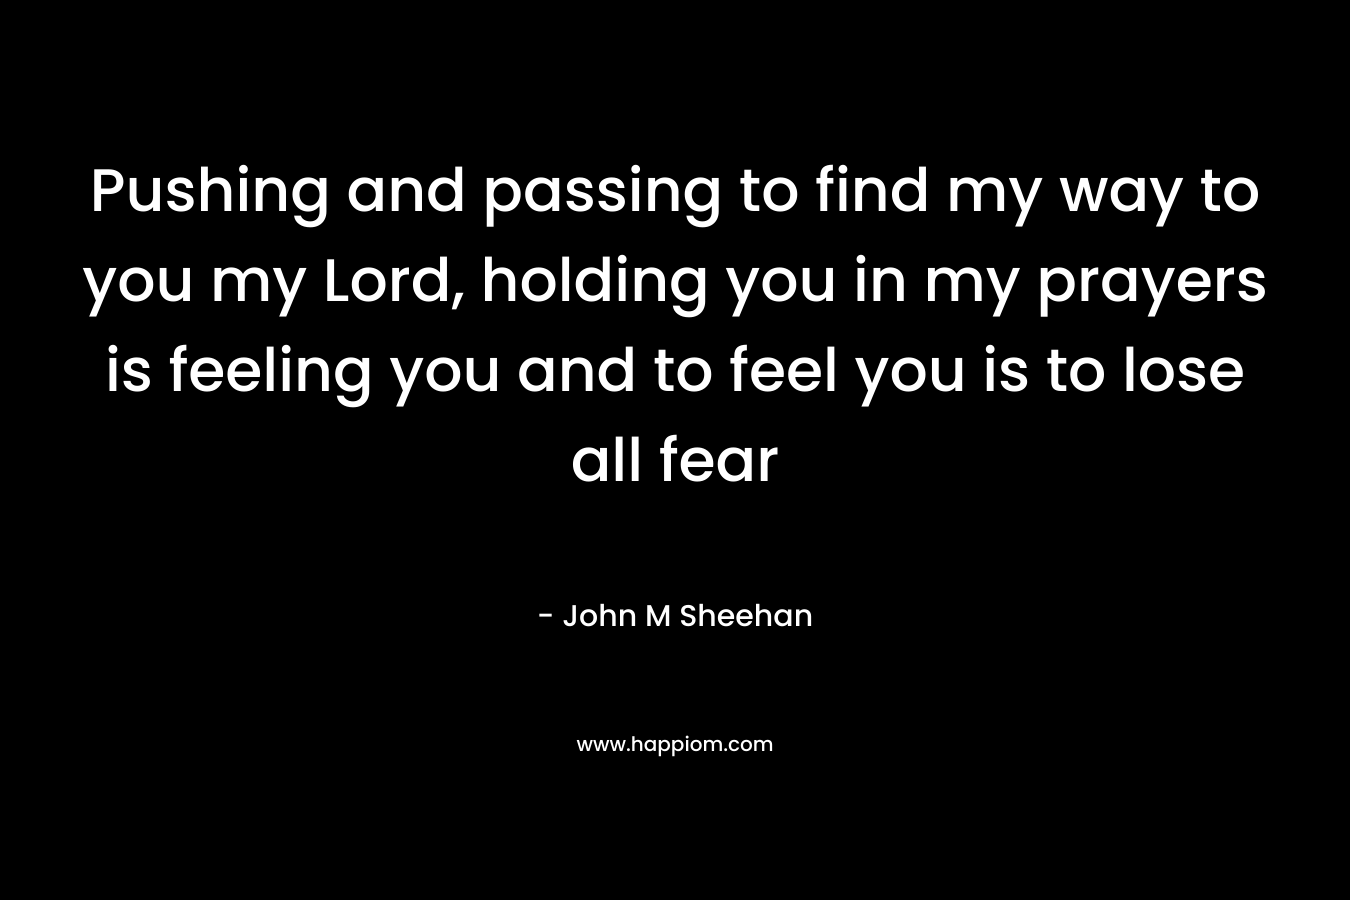 Pushing and passing to find my way to you my Lord, holding you in my prayers is feeling you and to feel you is to lose all fear